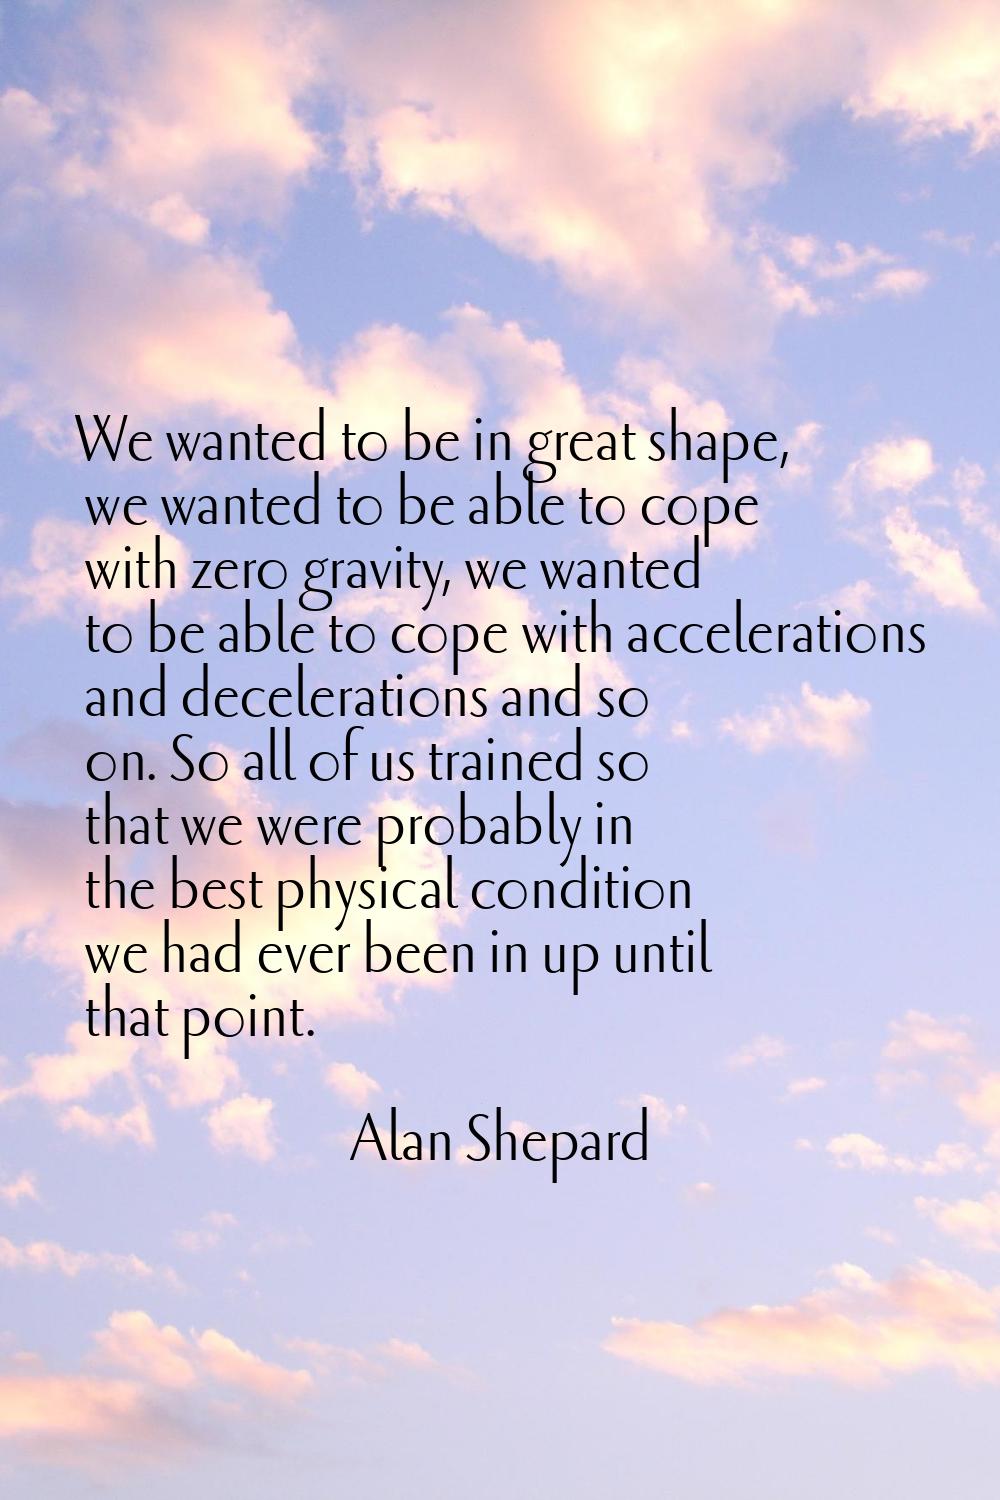 We wanted to be in great shape, we wanted to be able to cope with zero gravity, we wanted to be abl